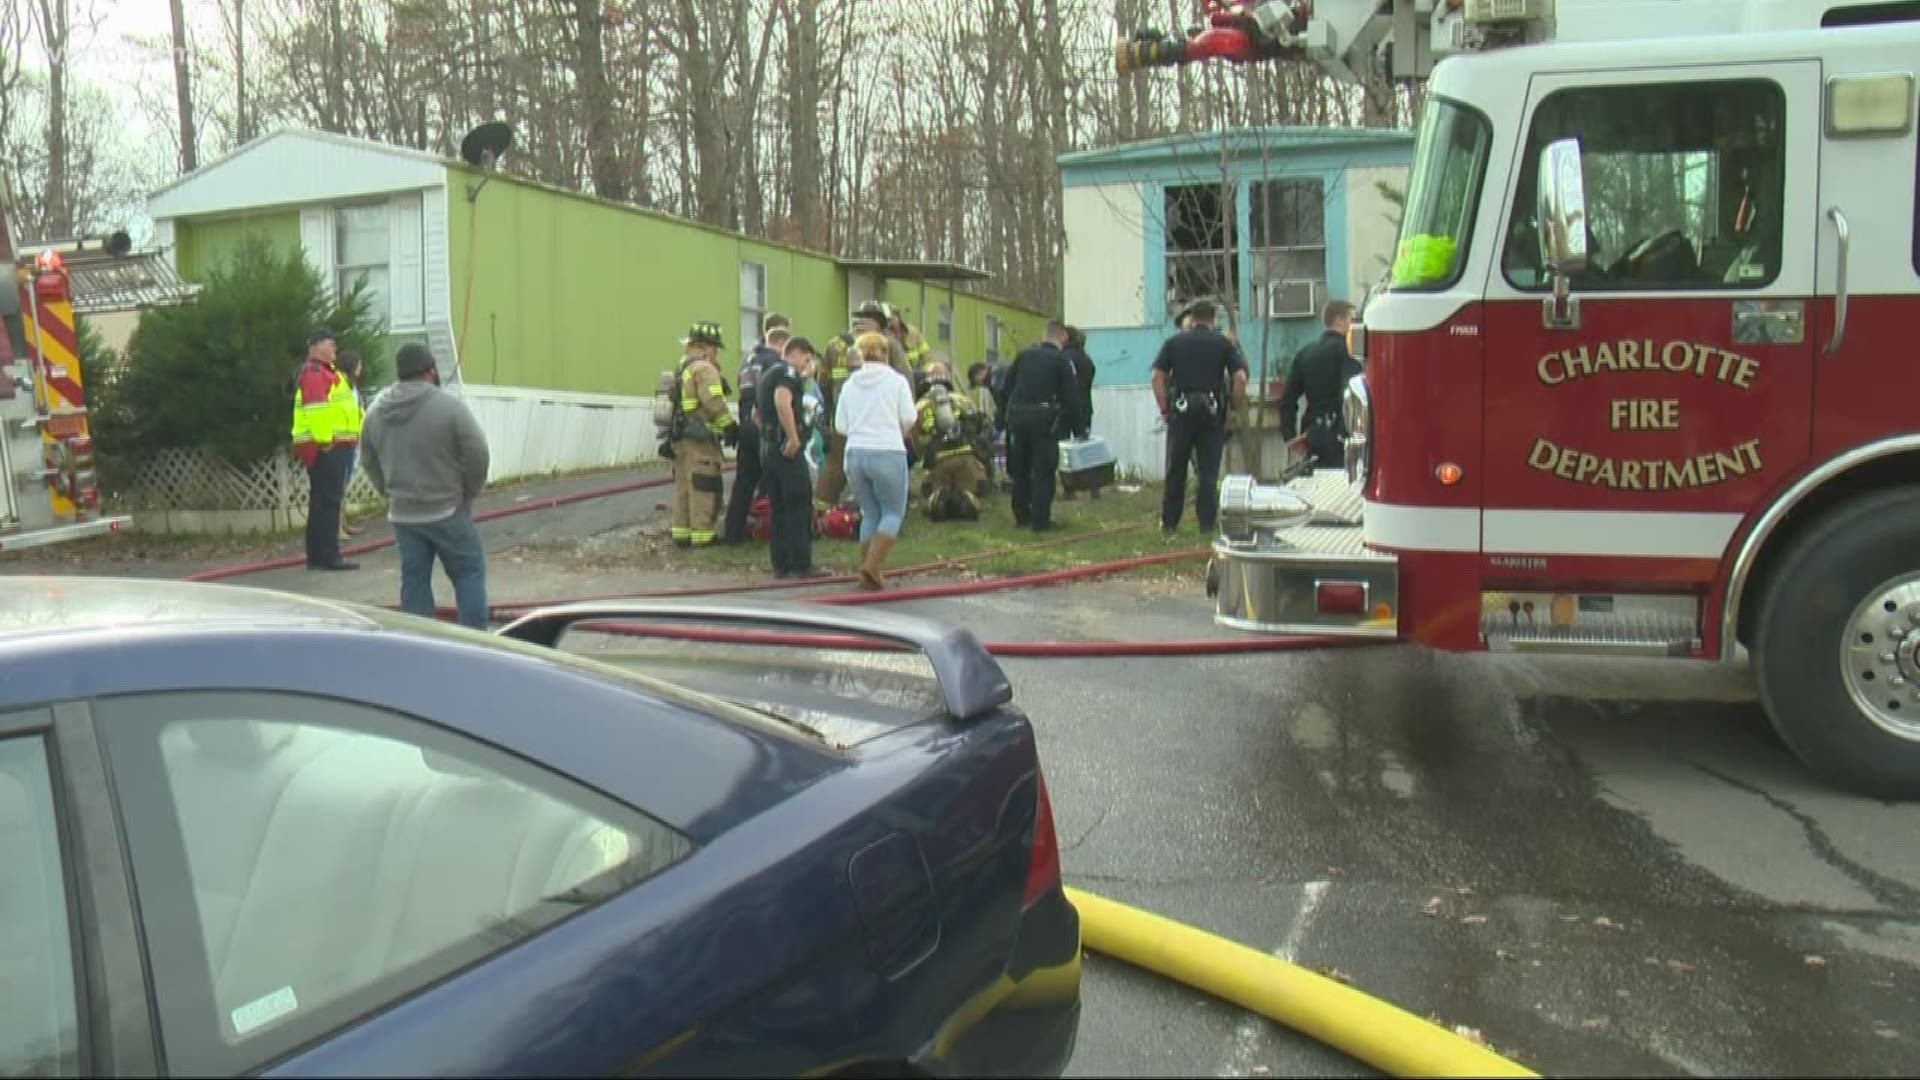 No one was home at the time of the fire, but five to six dogs were rescued from the house.